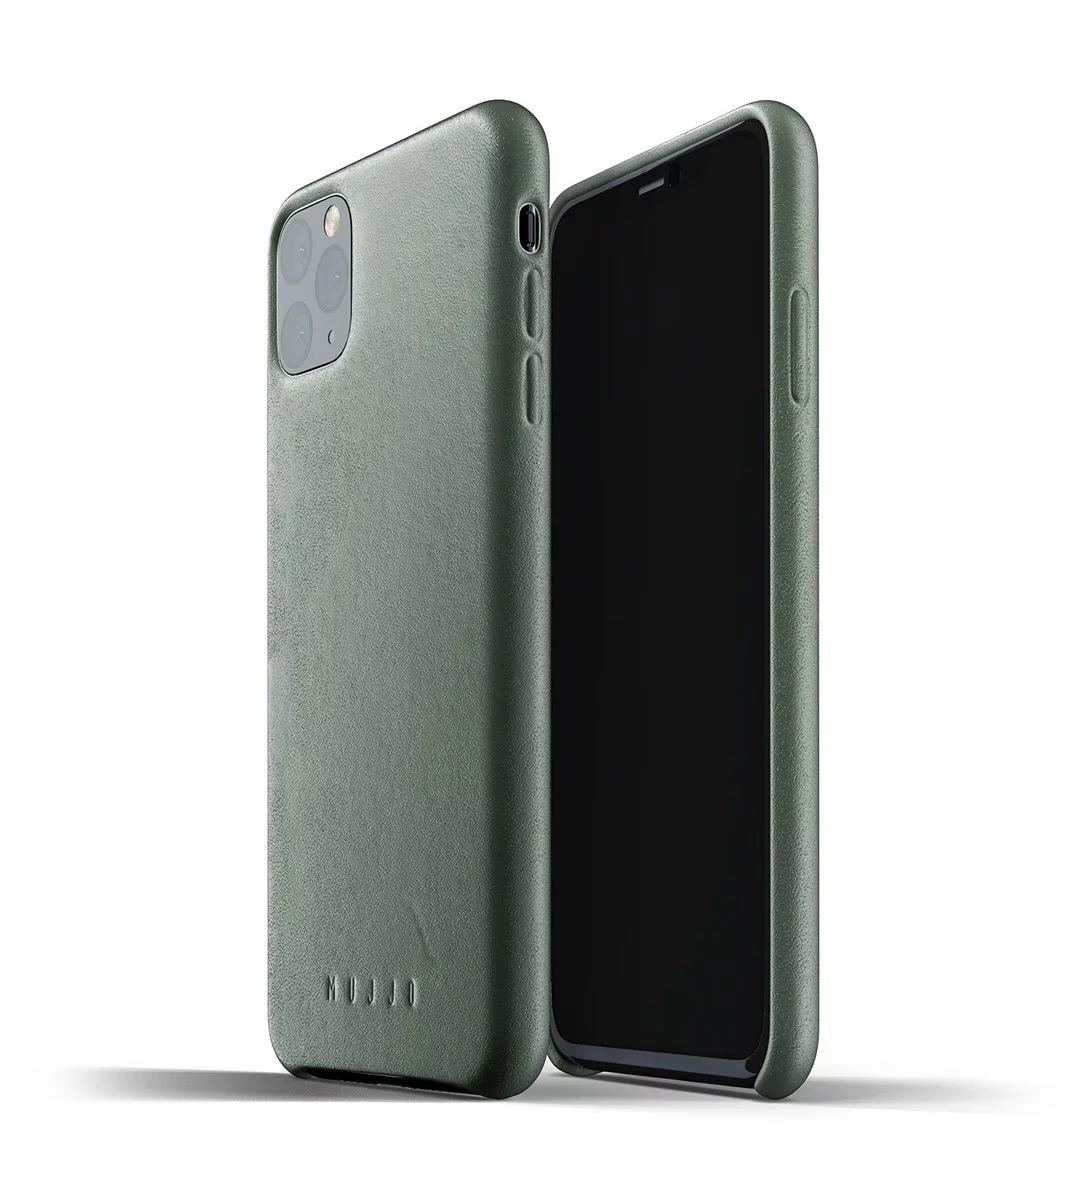 E-shop Kryt MUJJO Full Leather Case for iPhone 11 Pro Max - Slate Green (MUJJO-CL-003-SG)